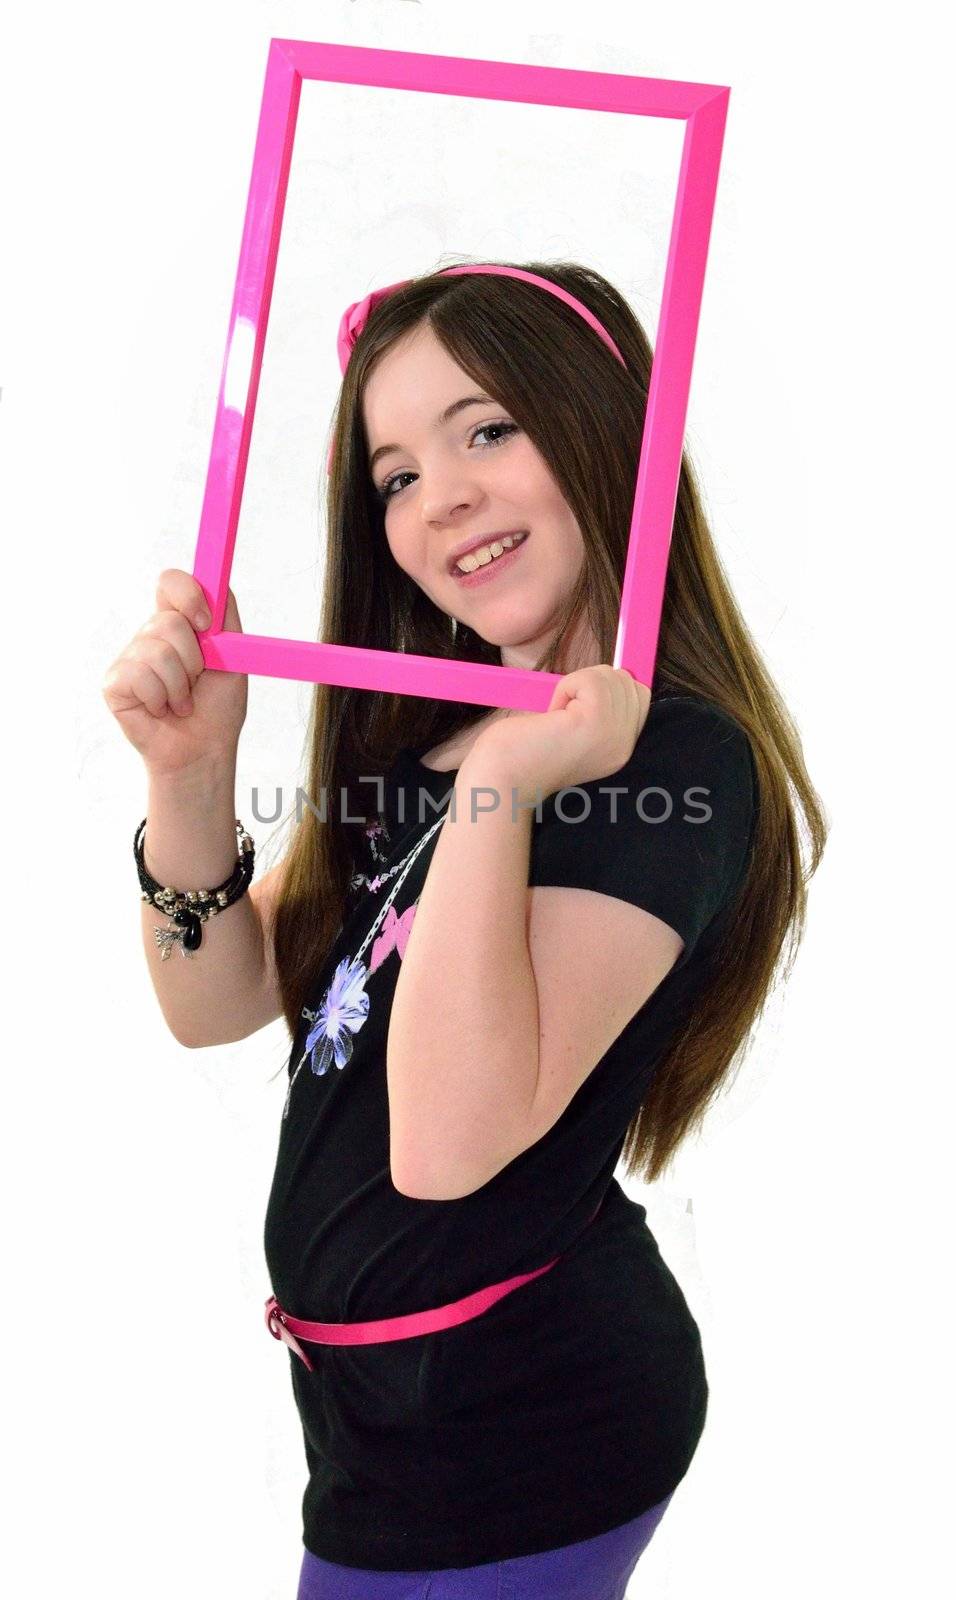 Another photo of the young girl with her face framed